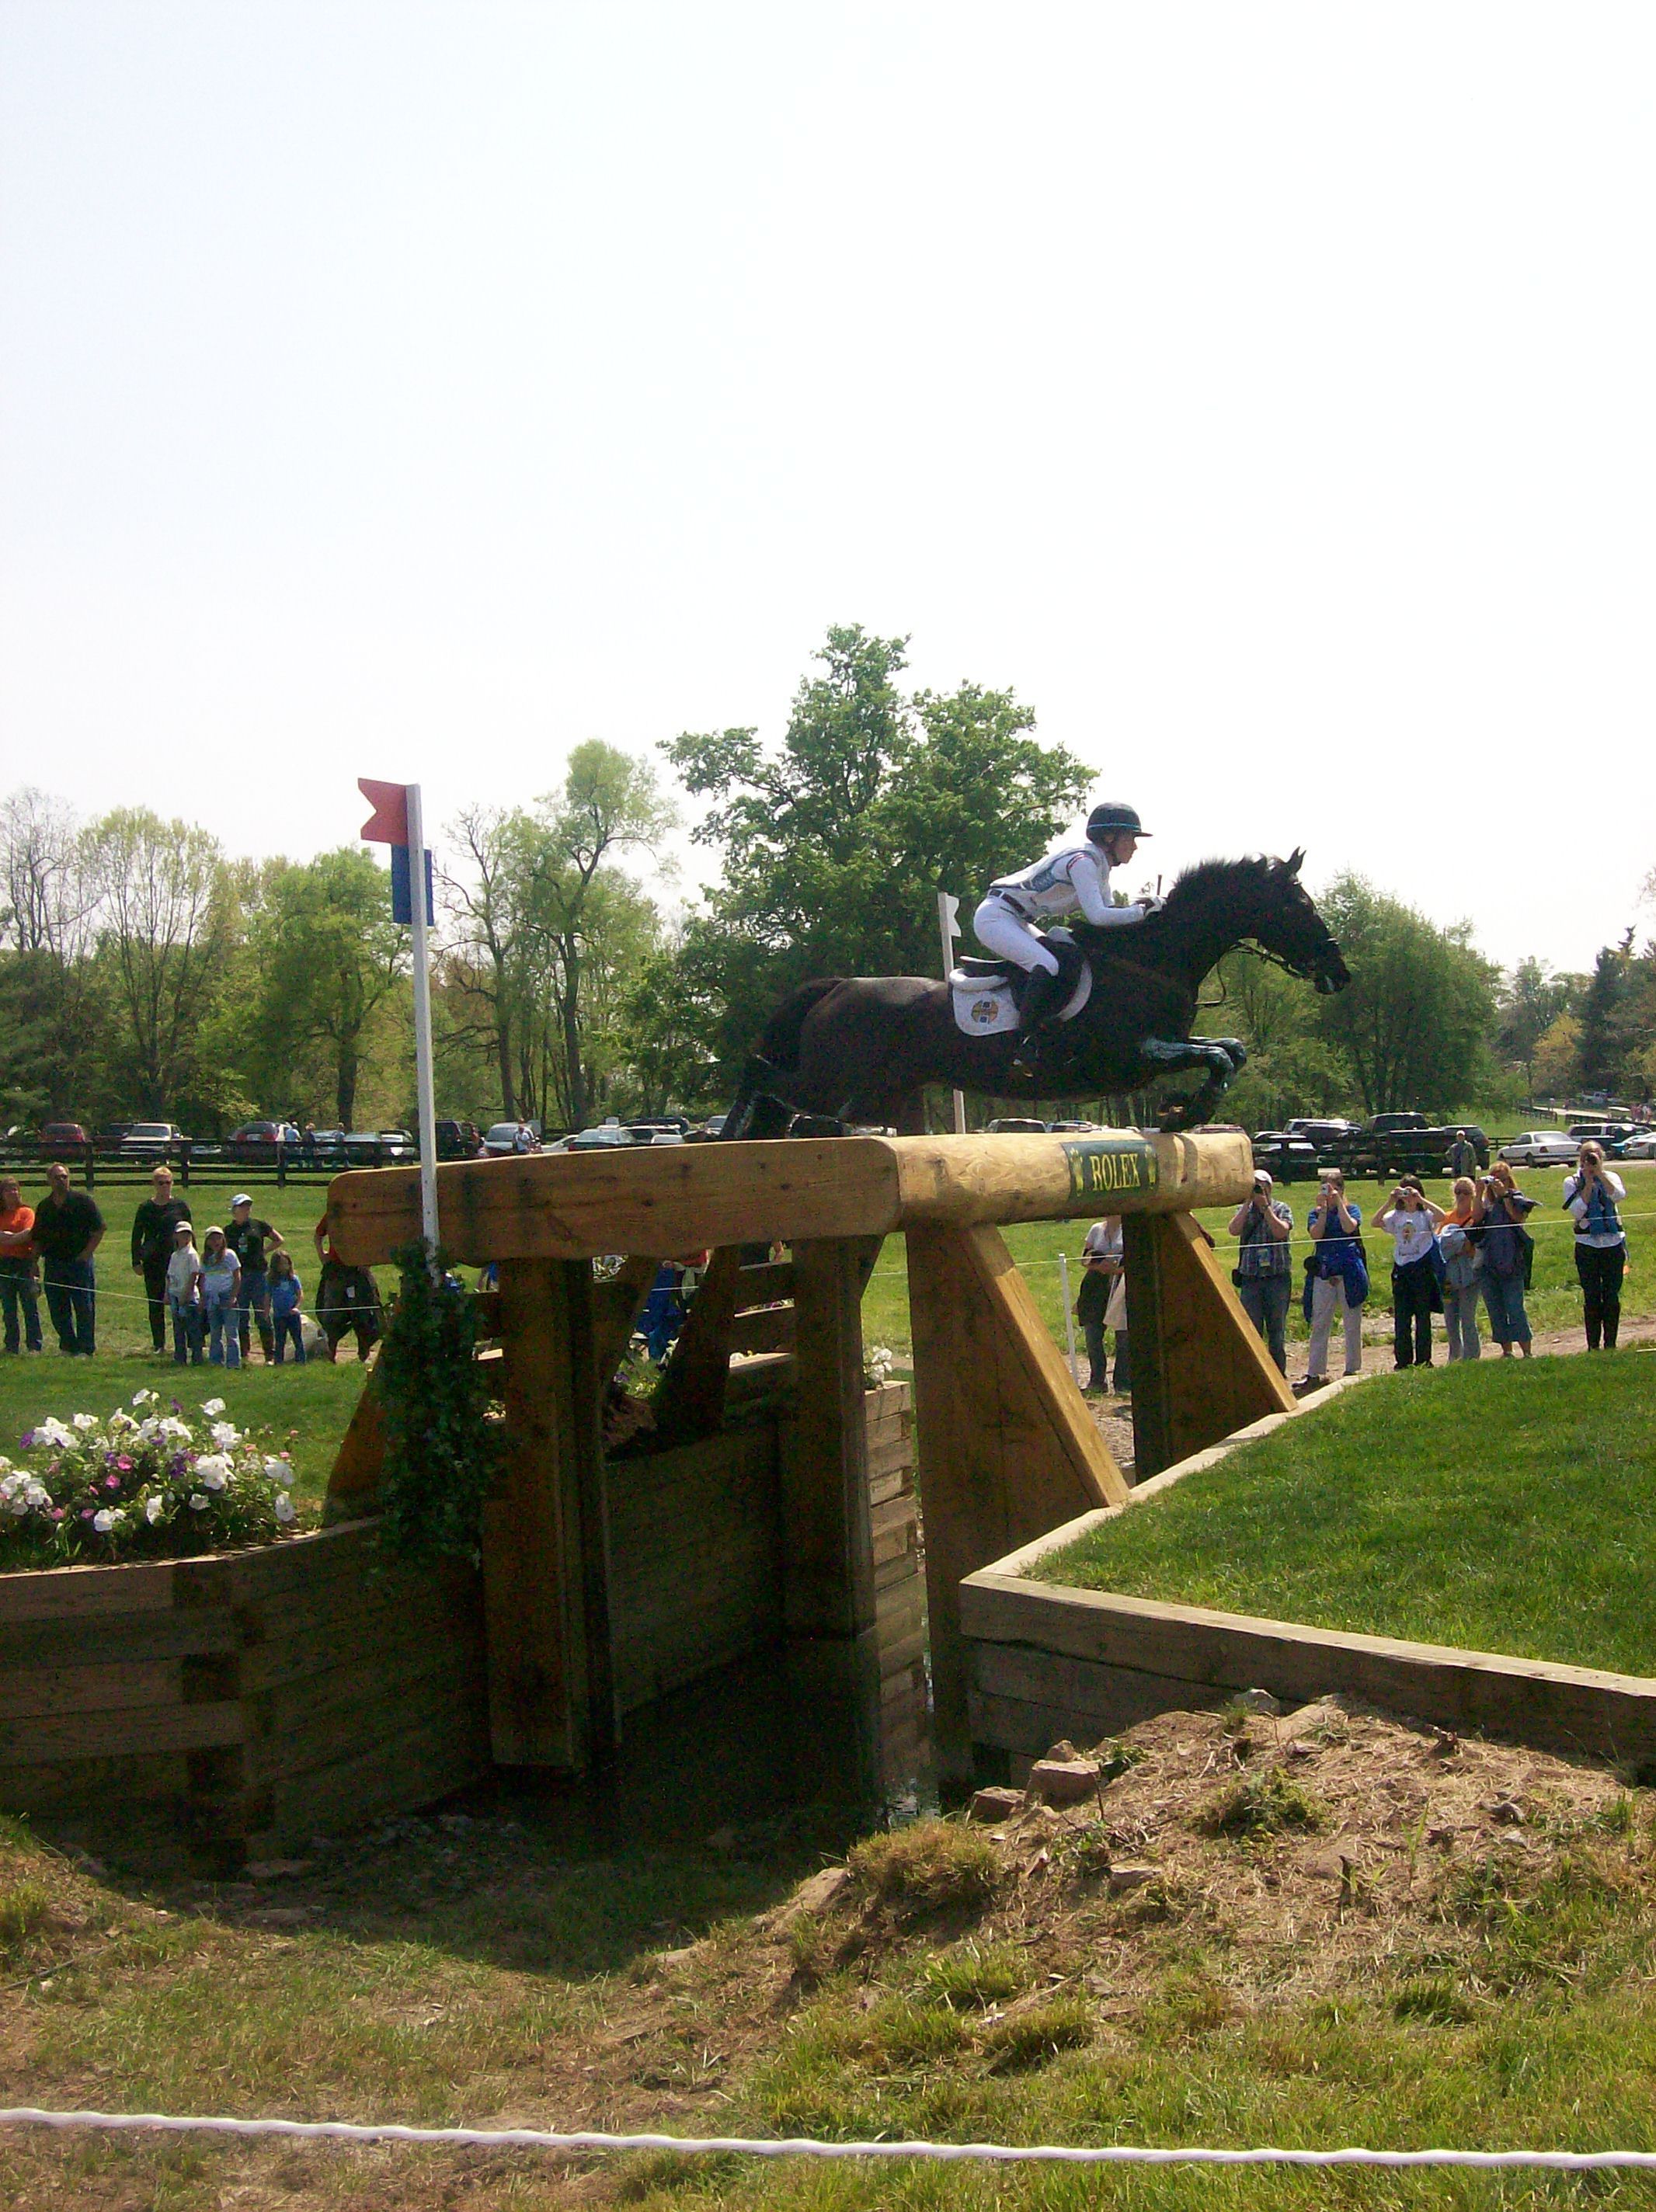 Rolex Kentucky 2010 crazy eventing… Cannot wait to see the 2013 XC course… favorite day by far is day 2.